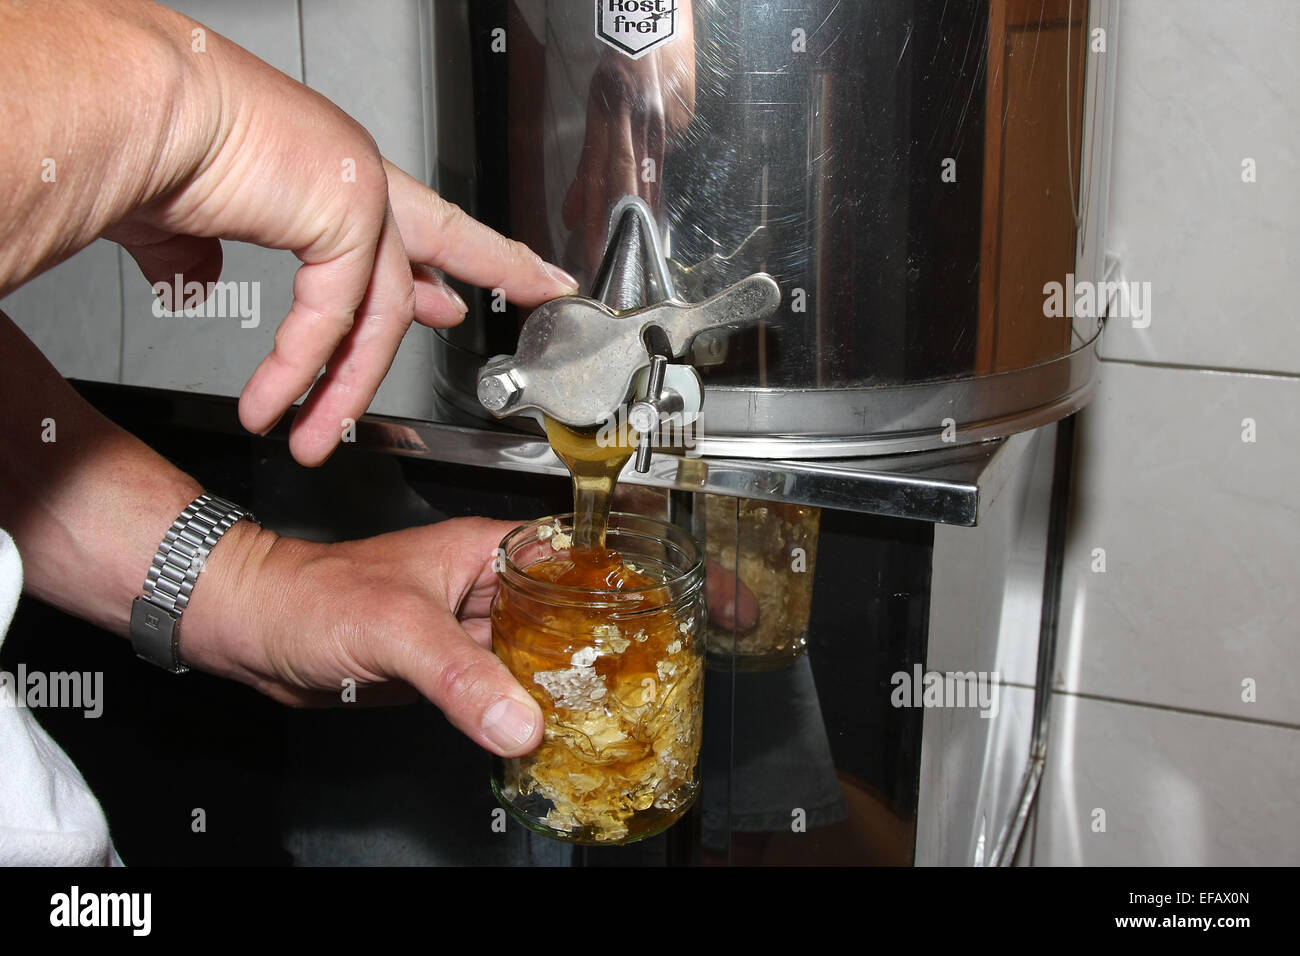 Finally, the glass with chewing wax is filled with honey. Chewing wax is obtained during the honey harvesting by the uncapping of ripe honeycombs. Photo: Klaus Nowottnick Date: June 19, 2011 Stock Photo